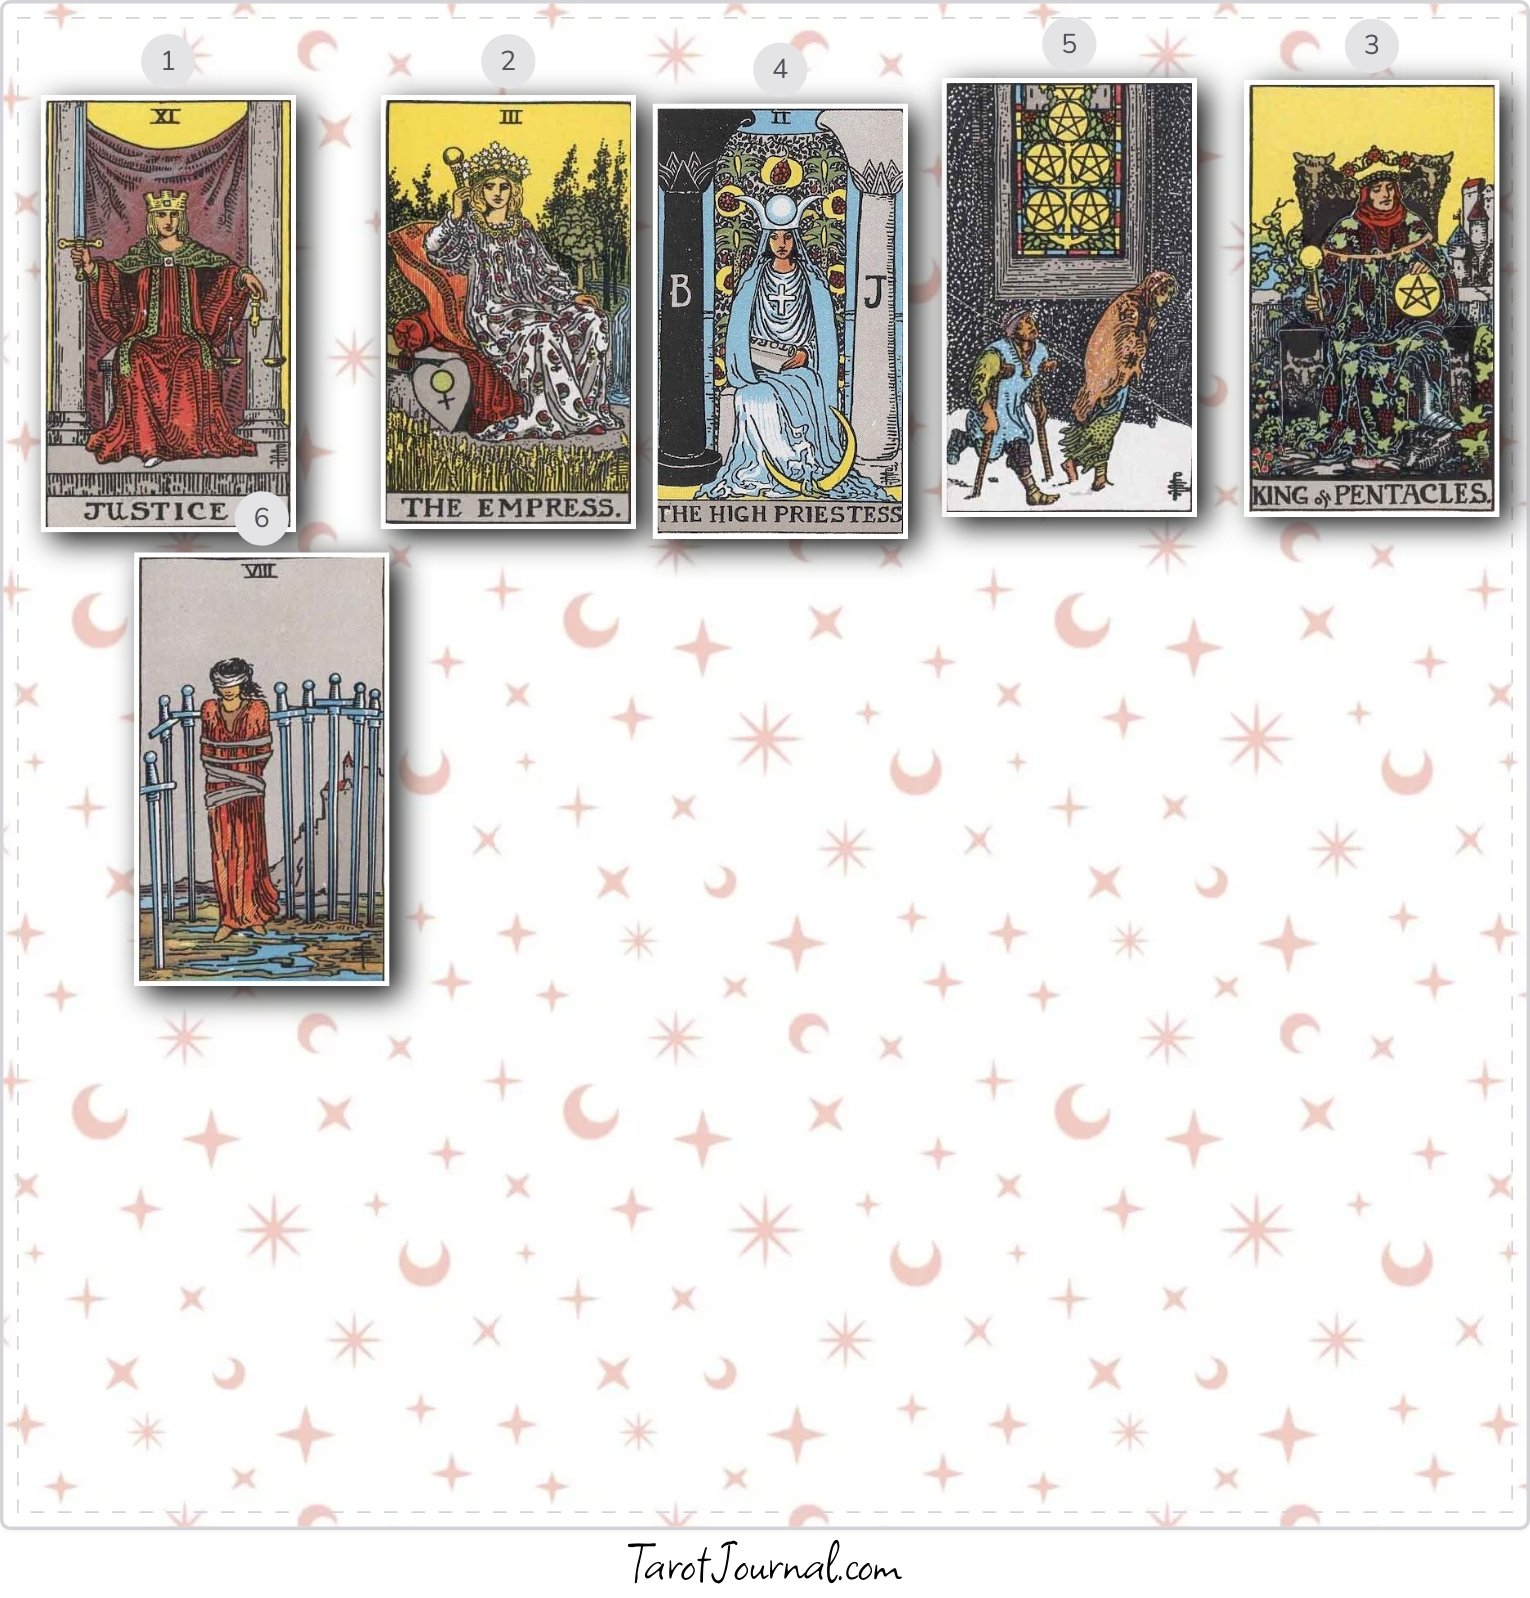 should i continue to apply for my dream university? - tarot reading by Minh Tu Chung